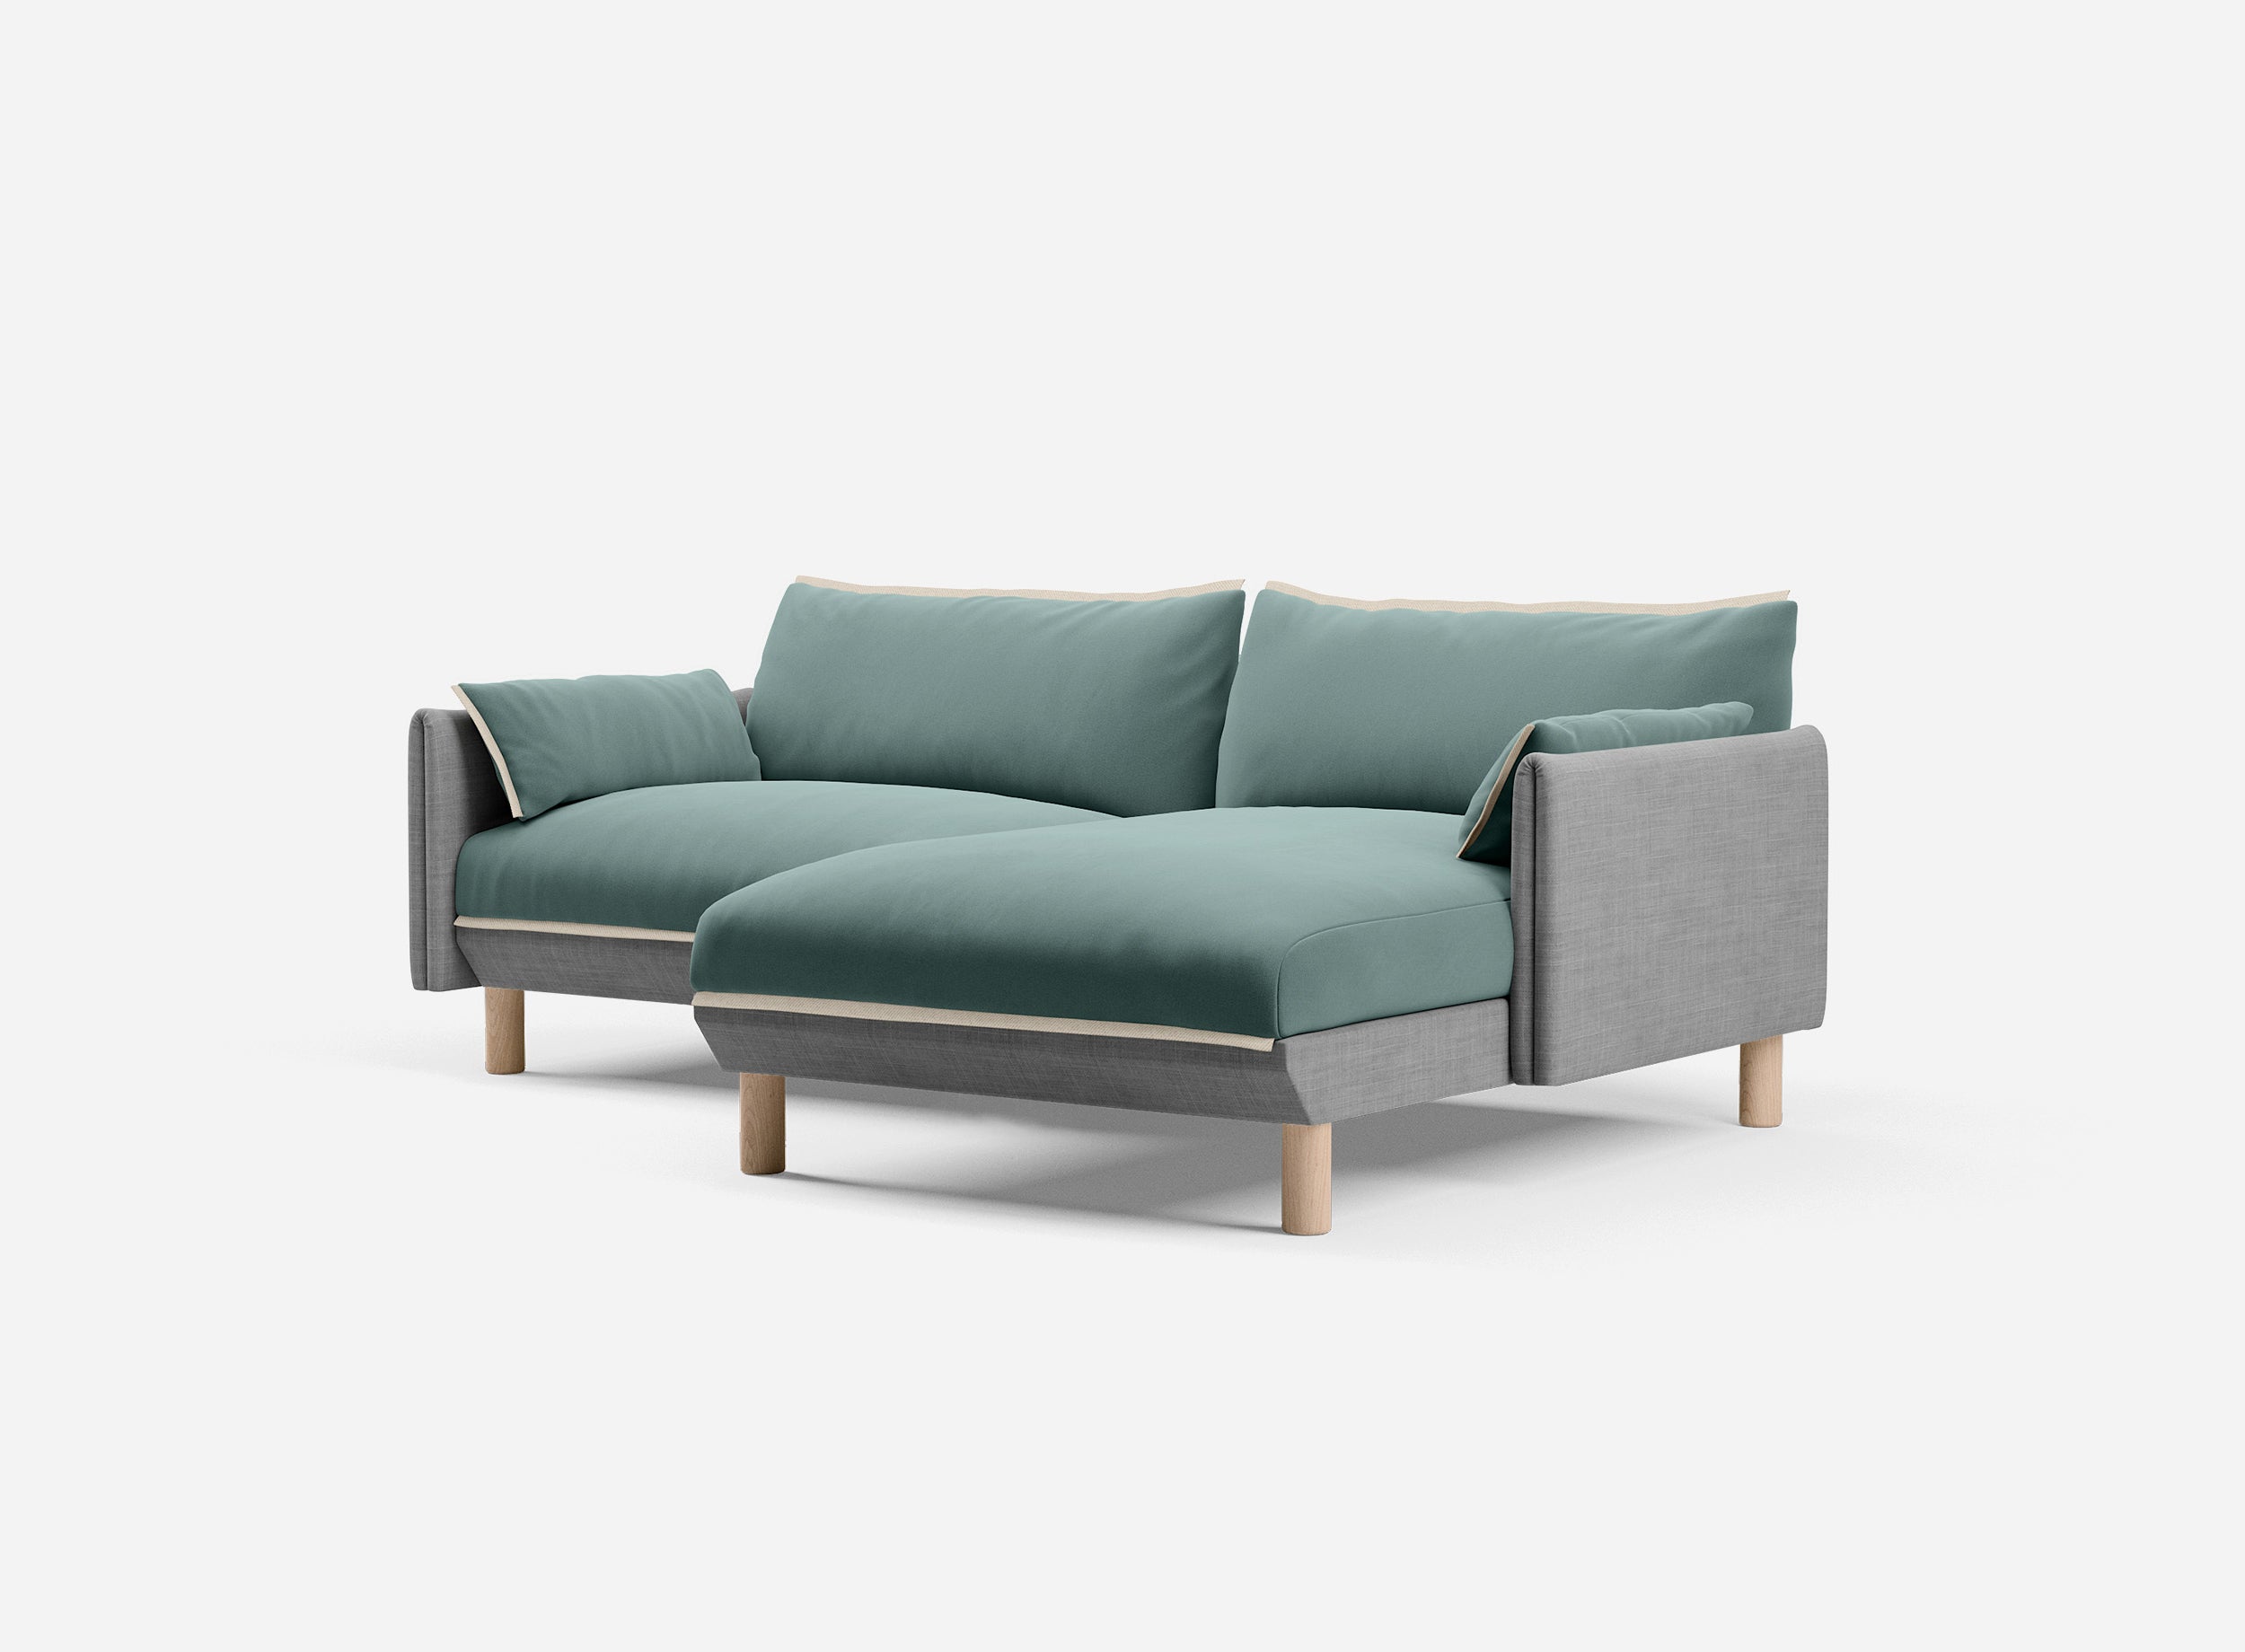 3 Seater Chaise Corner Right Hand Sofa | Weave Light Grey - Cozmo @ Sage Cotton Jacket | Natural Trim